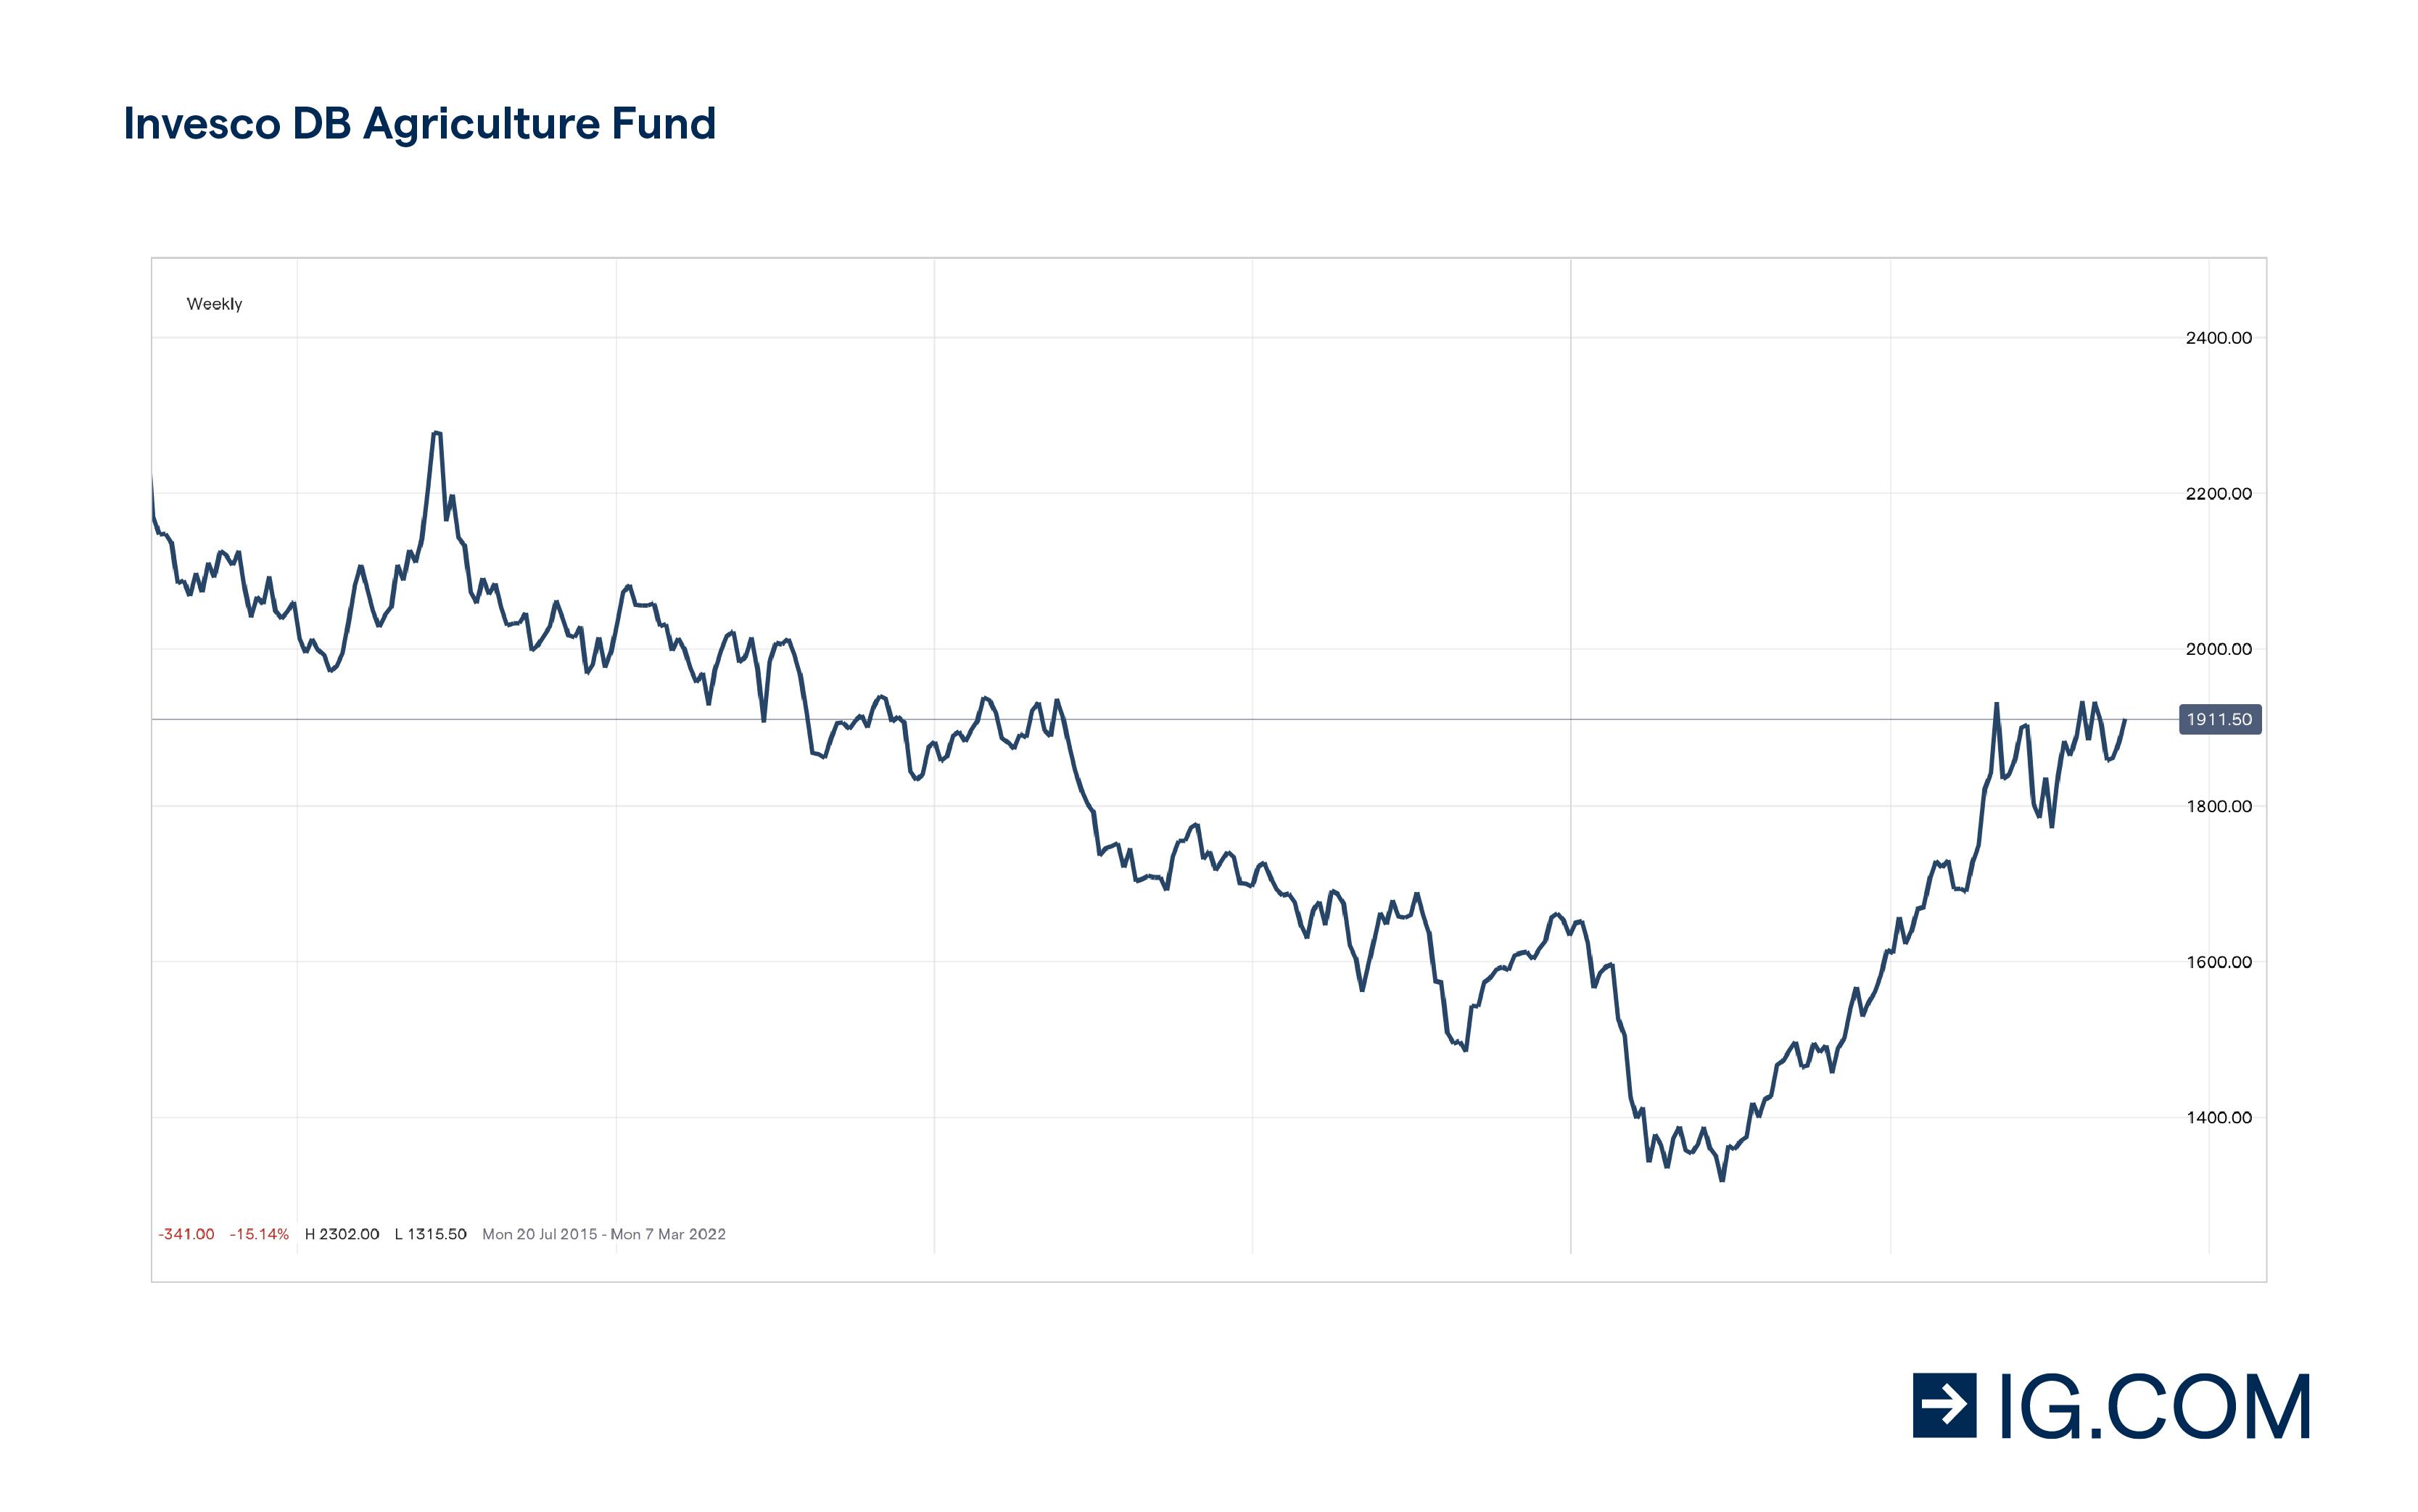 Invesco DB Agriculture Fund chart